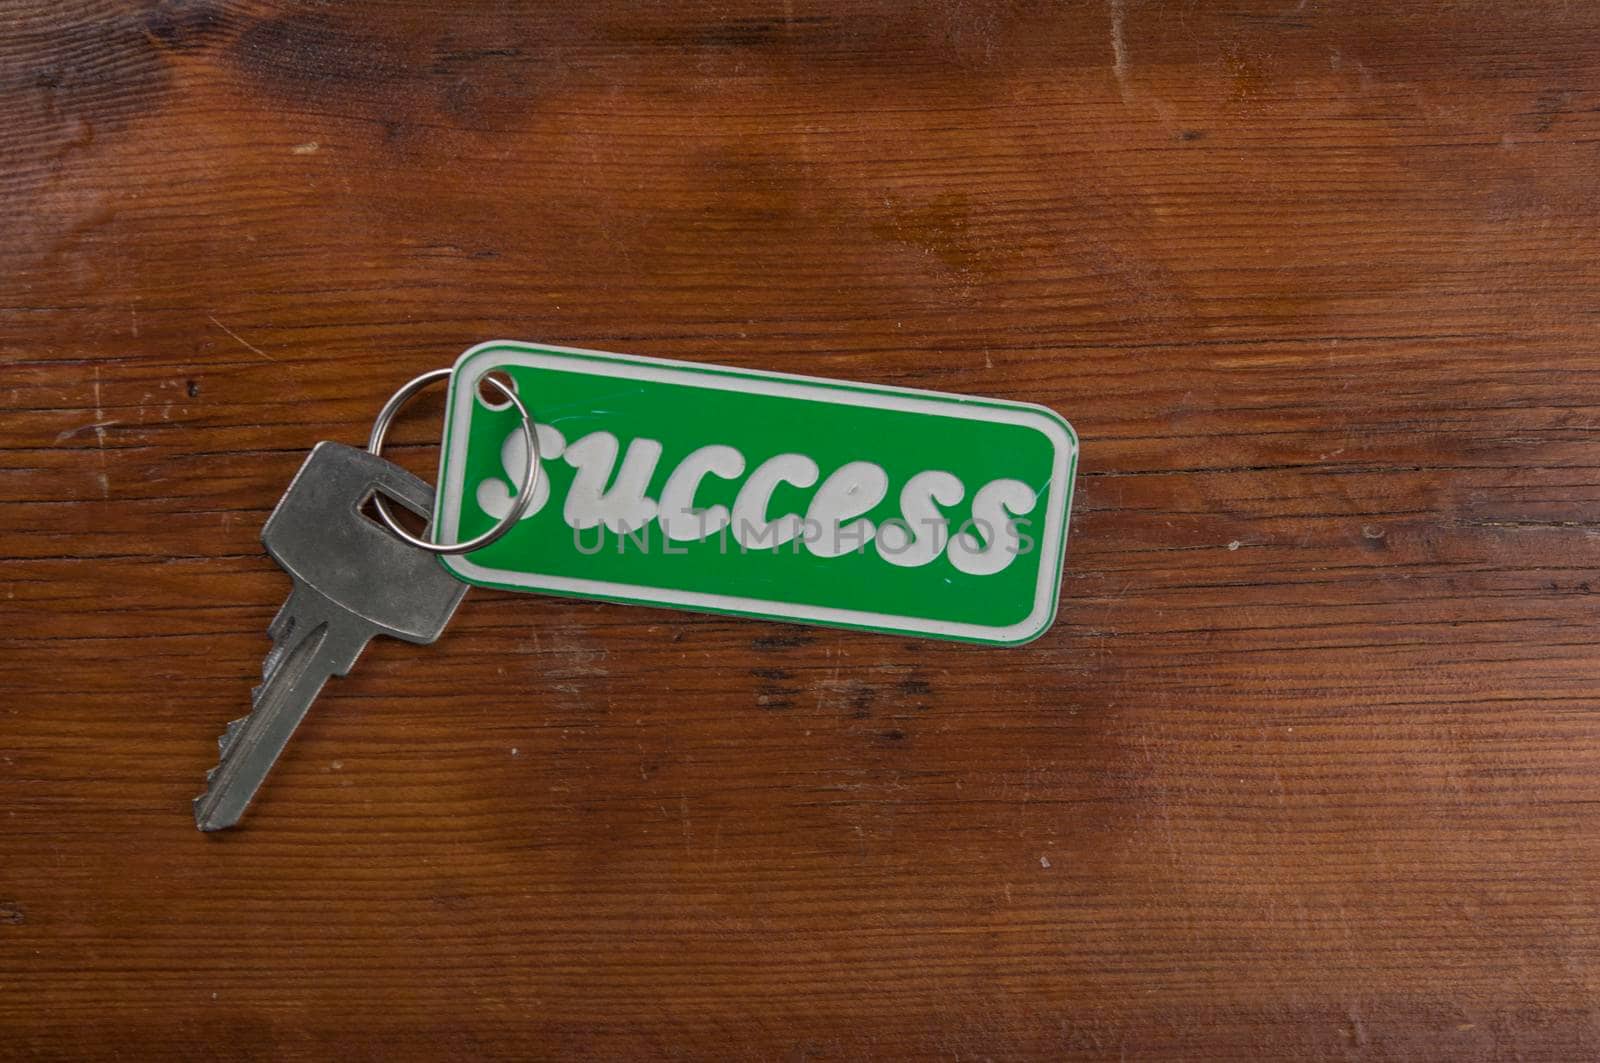 Key to success on wood background by inxti